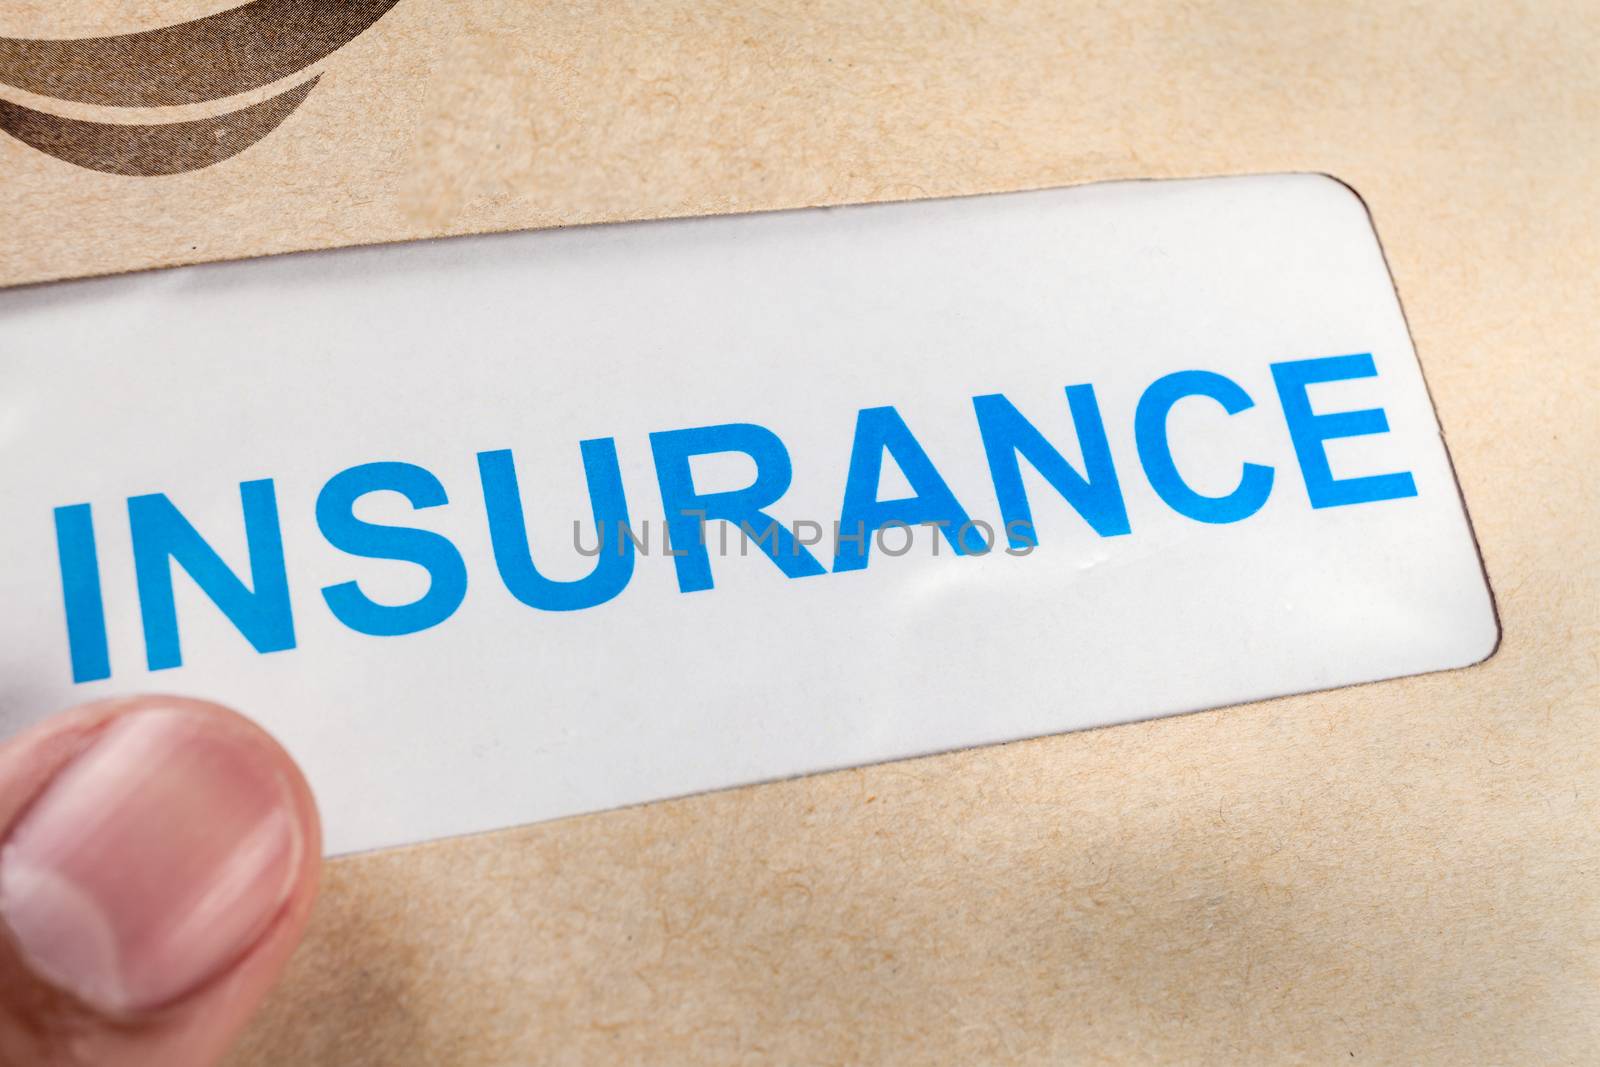 Insurance Claim form in brown envelope, can use insurance concept